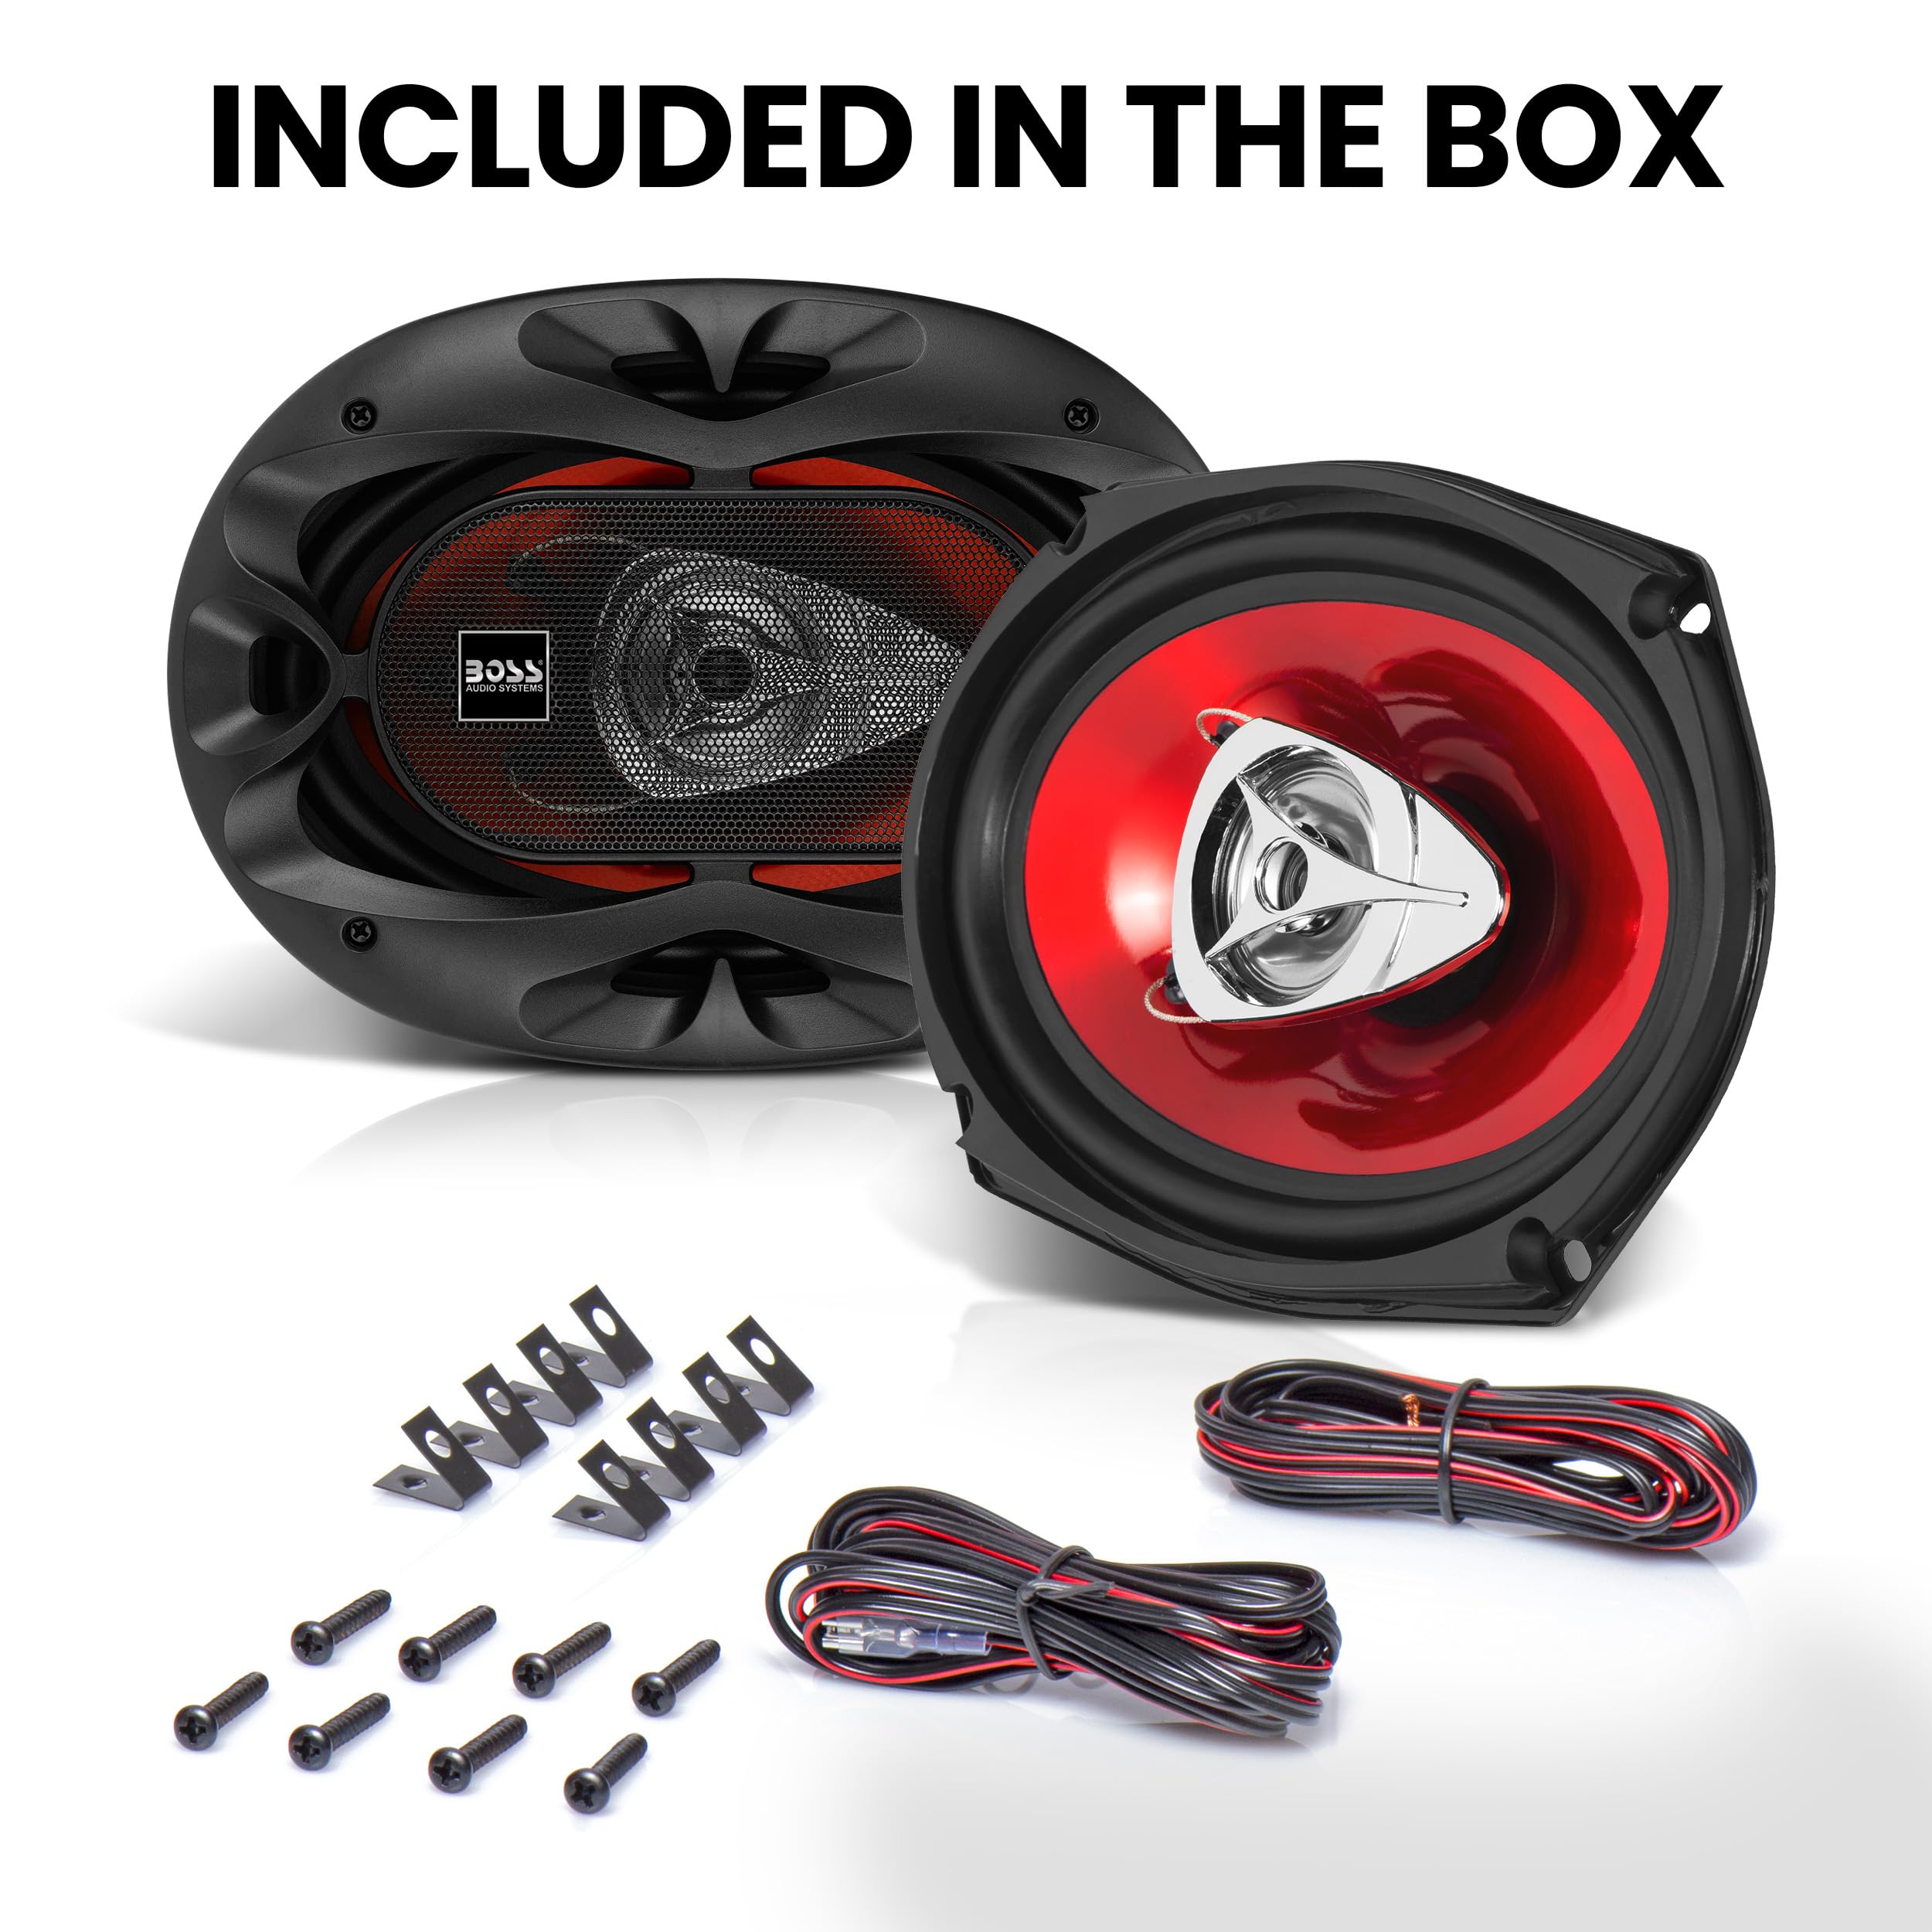 BOSS Audio Systems CH6930 Chaos Series 6 x 9 Inch Car Stereo Door Speakers - 400 Watts Max, 3 Way, Full Range Audio, Tweeters, Coaxial, Sold in Pairs